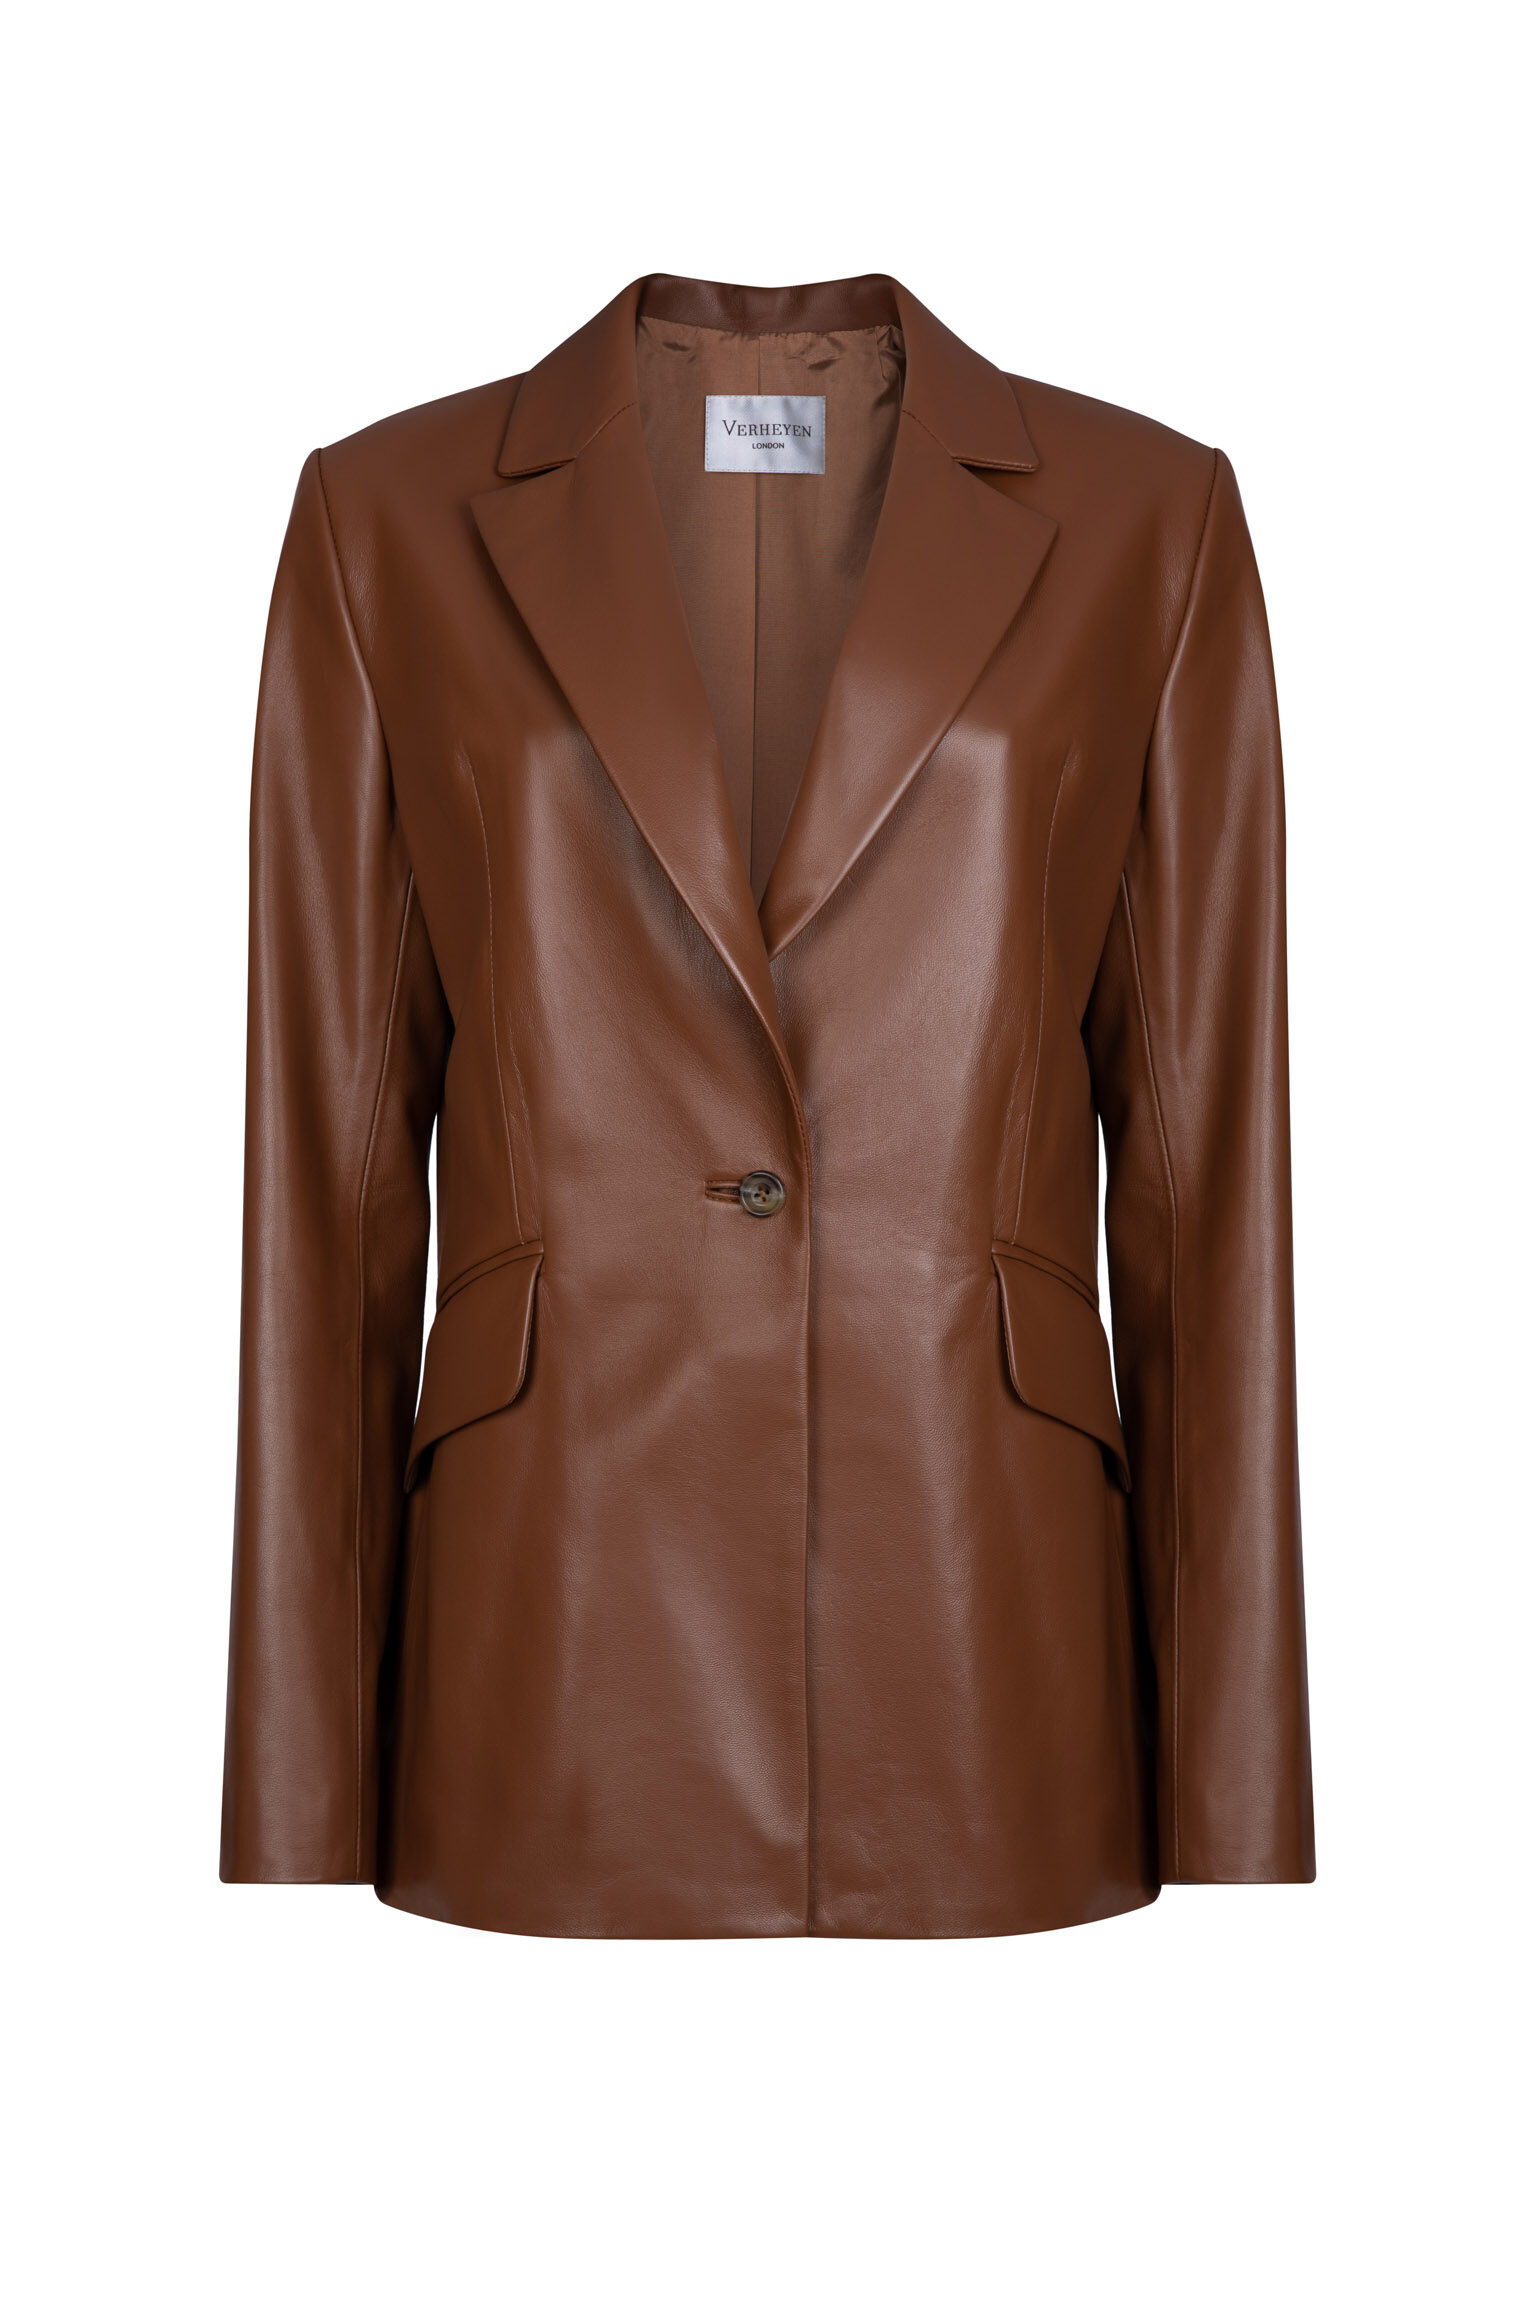 Chesca Oversize Blazer in Tan Leather